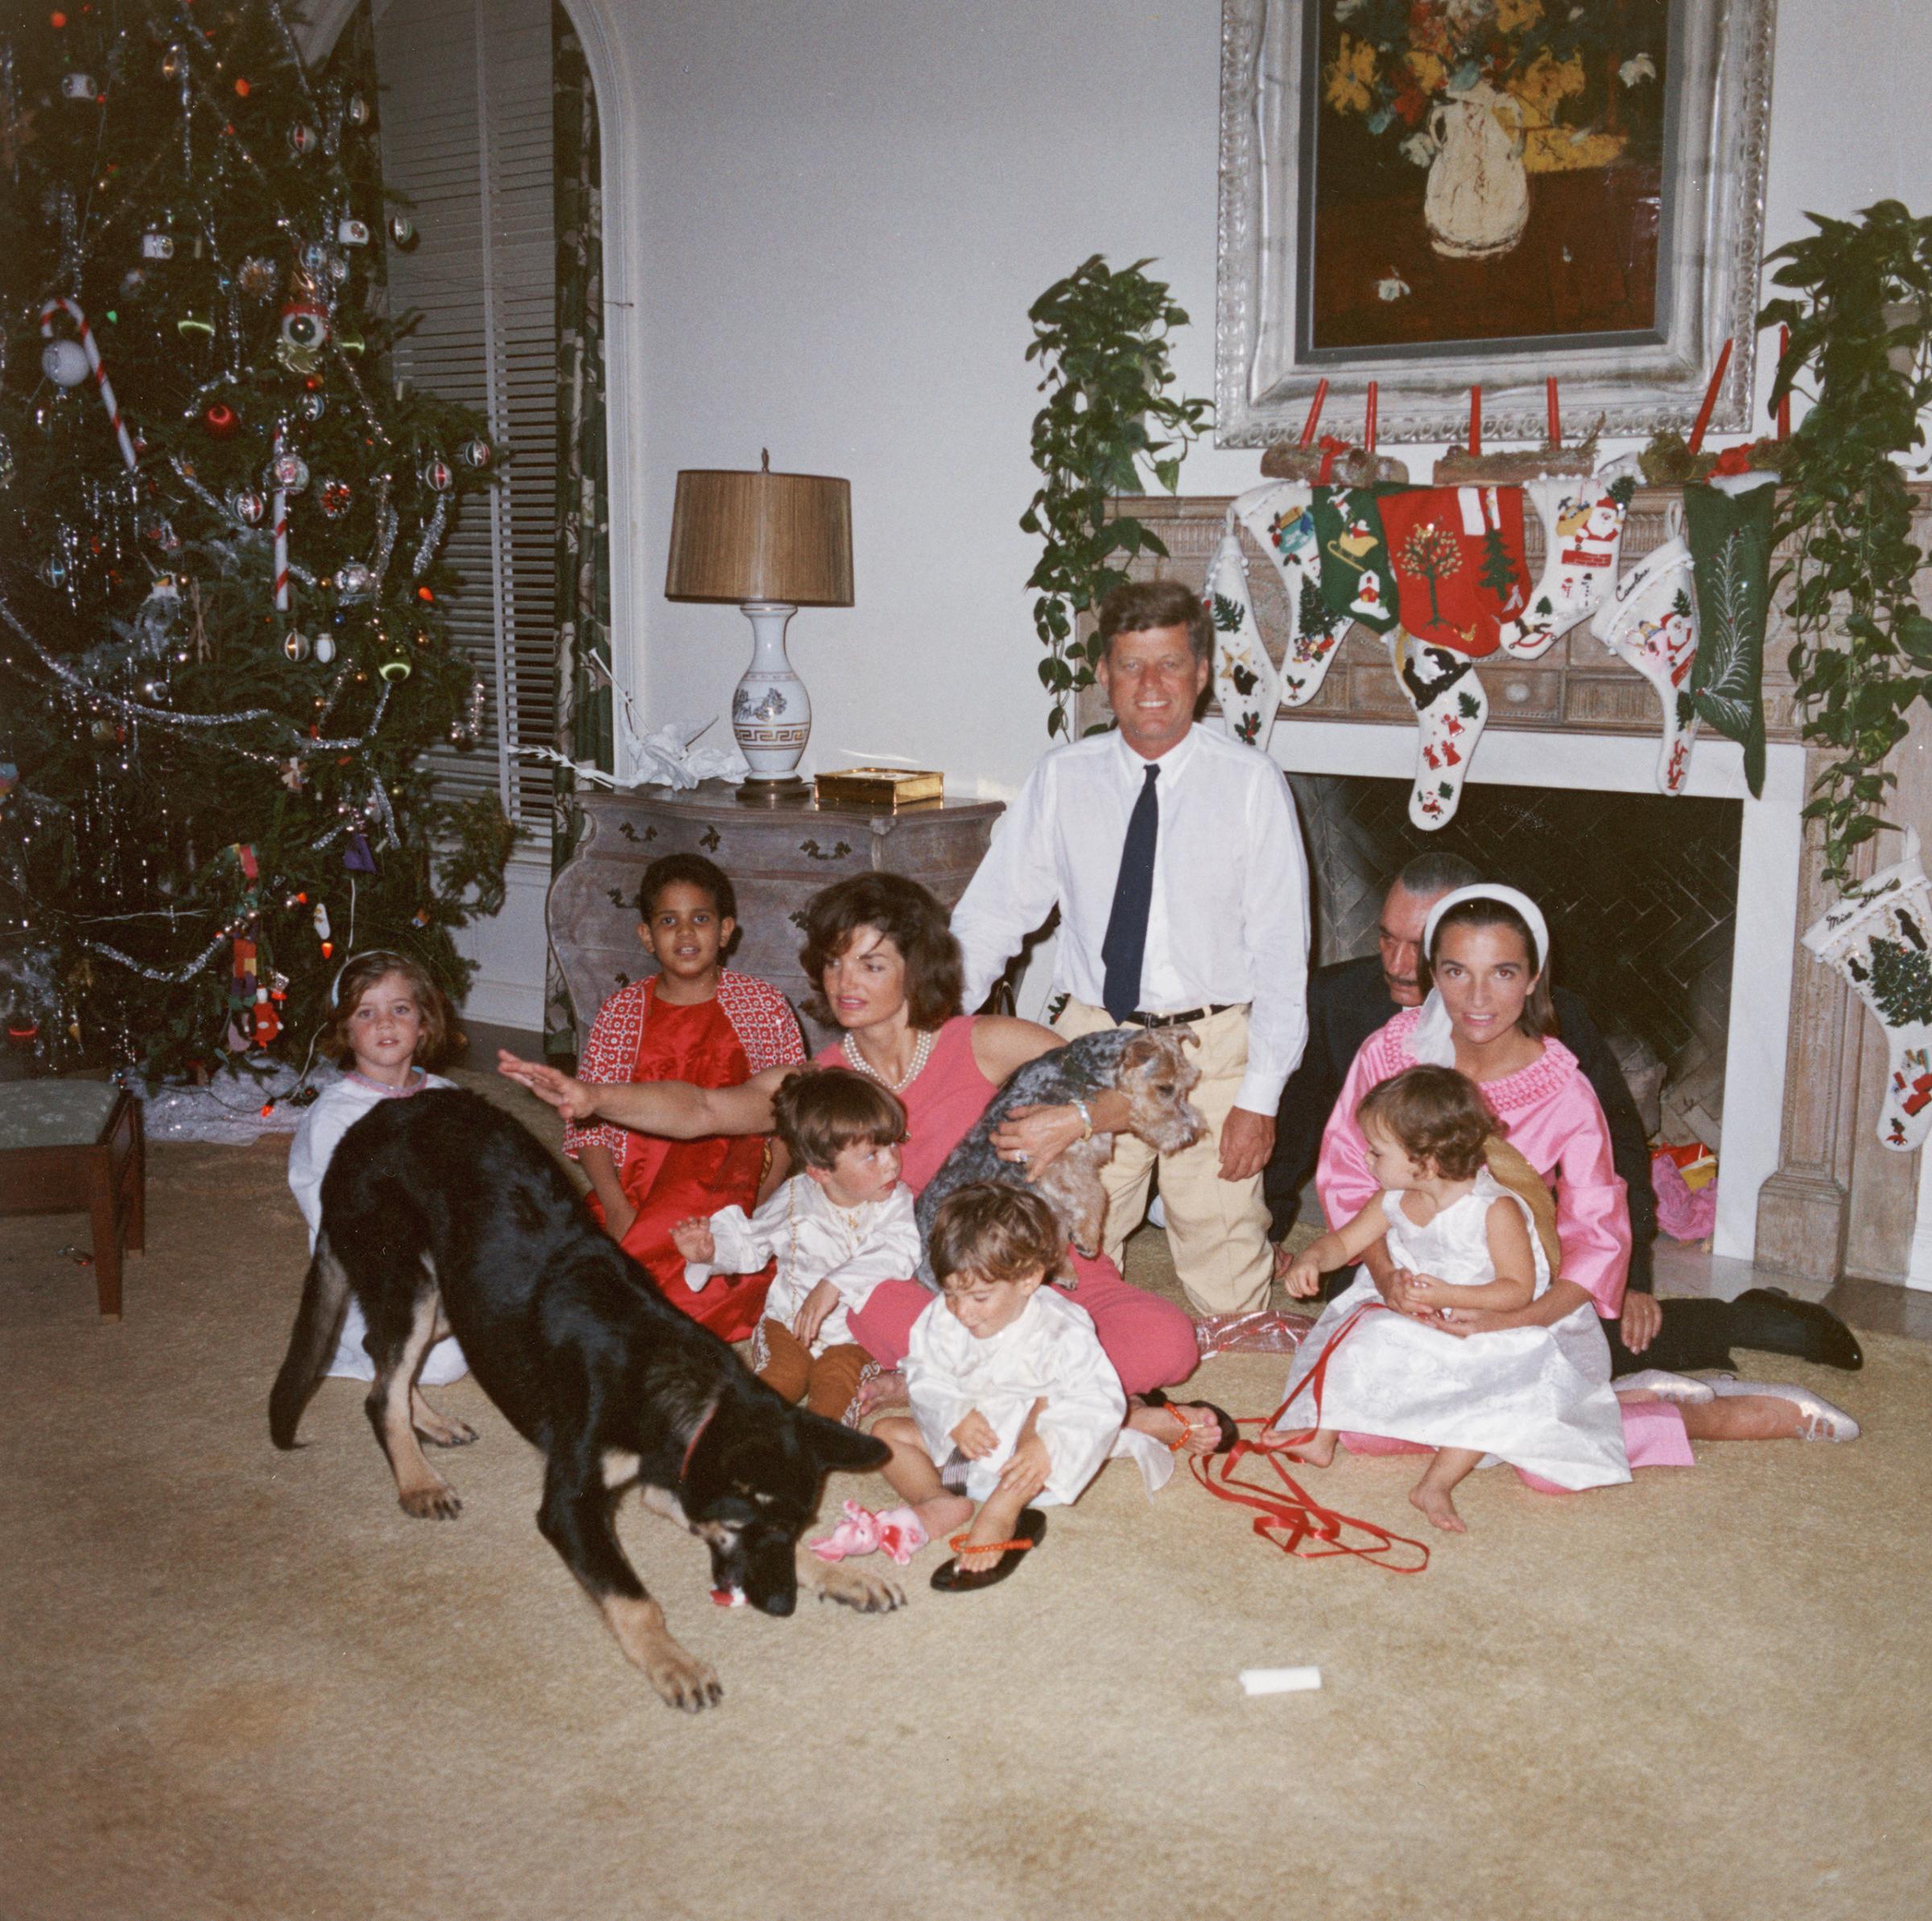 John F. Kennedy and Jacqueline Kennedy pose with their family on Christmas Day at the White House, Dec. 25, 1962.